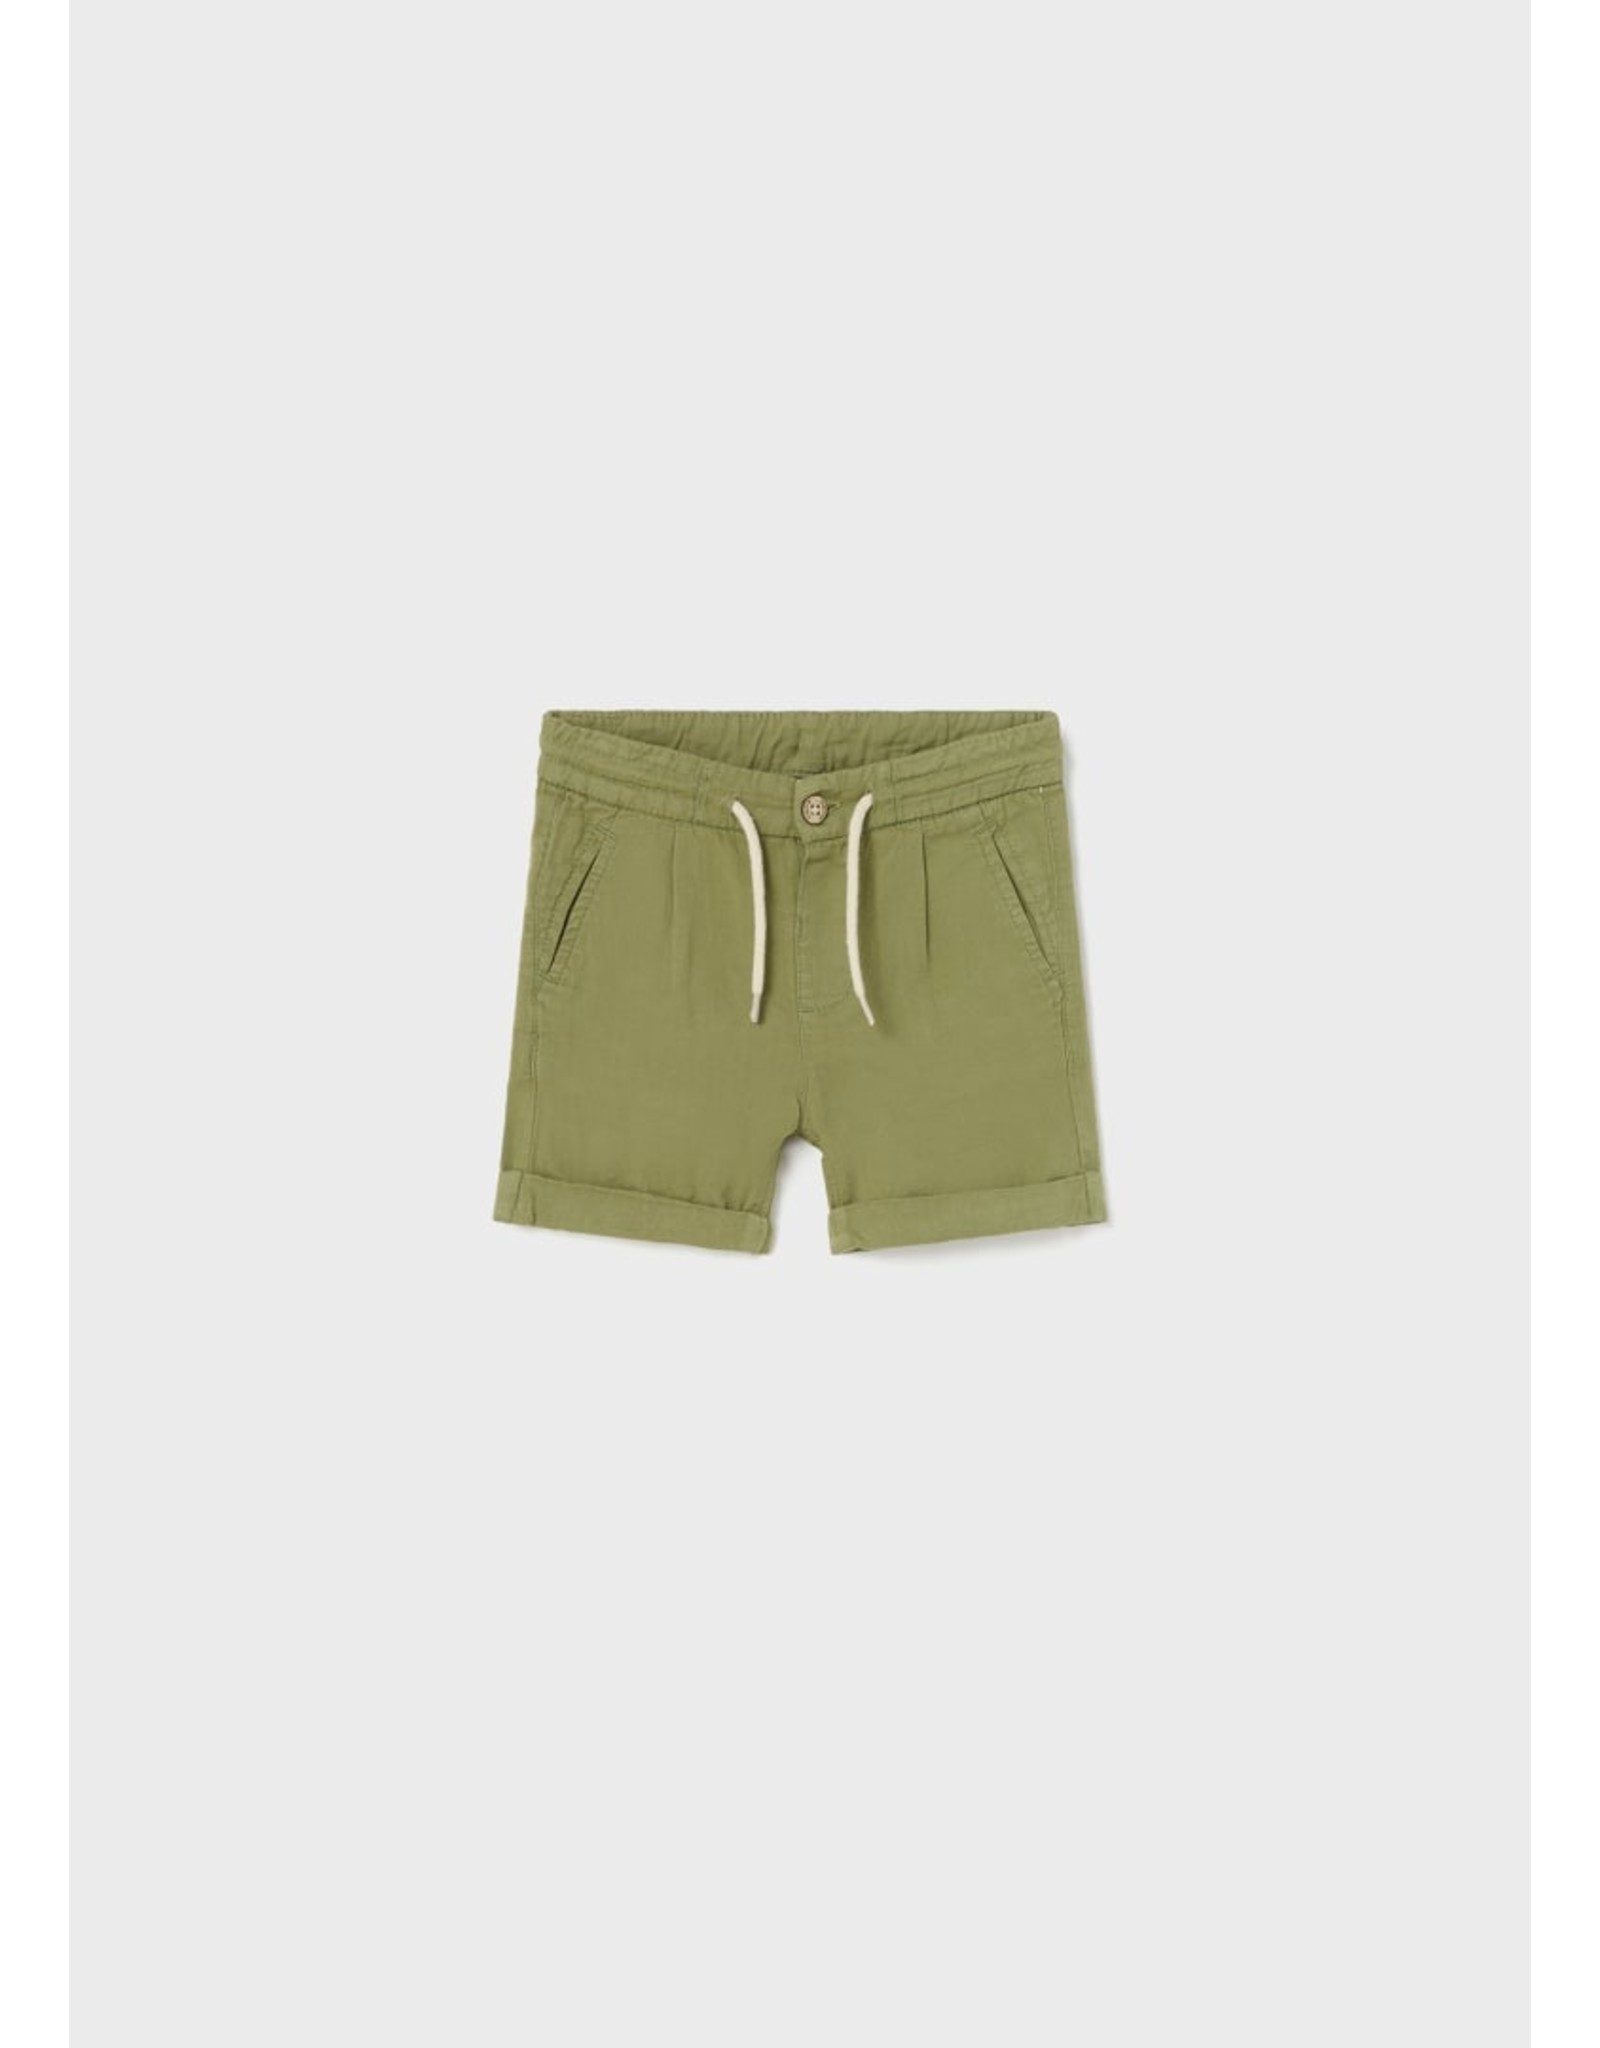 Mayoral linen relax shorts  Jungle  SS23-1288-91